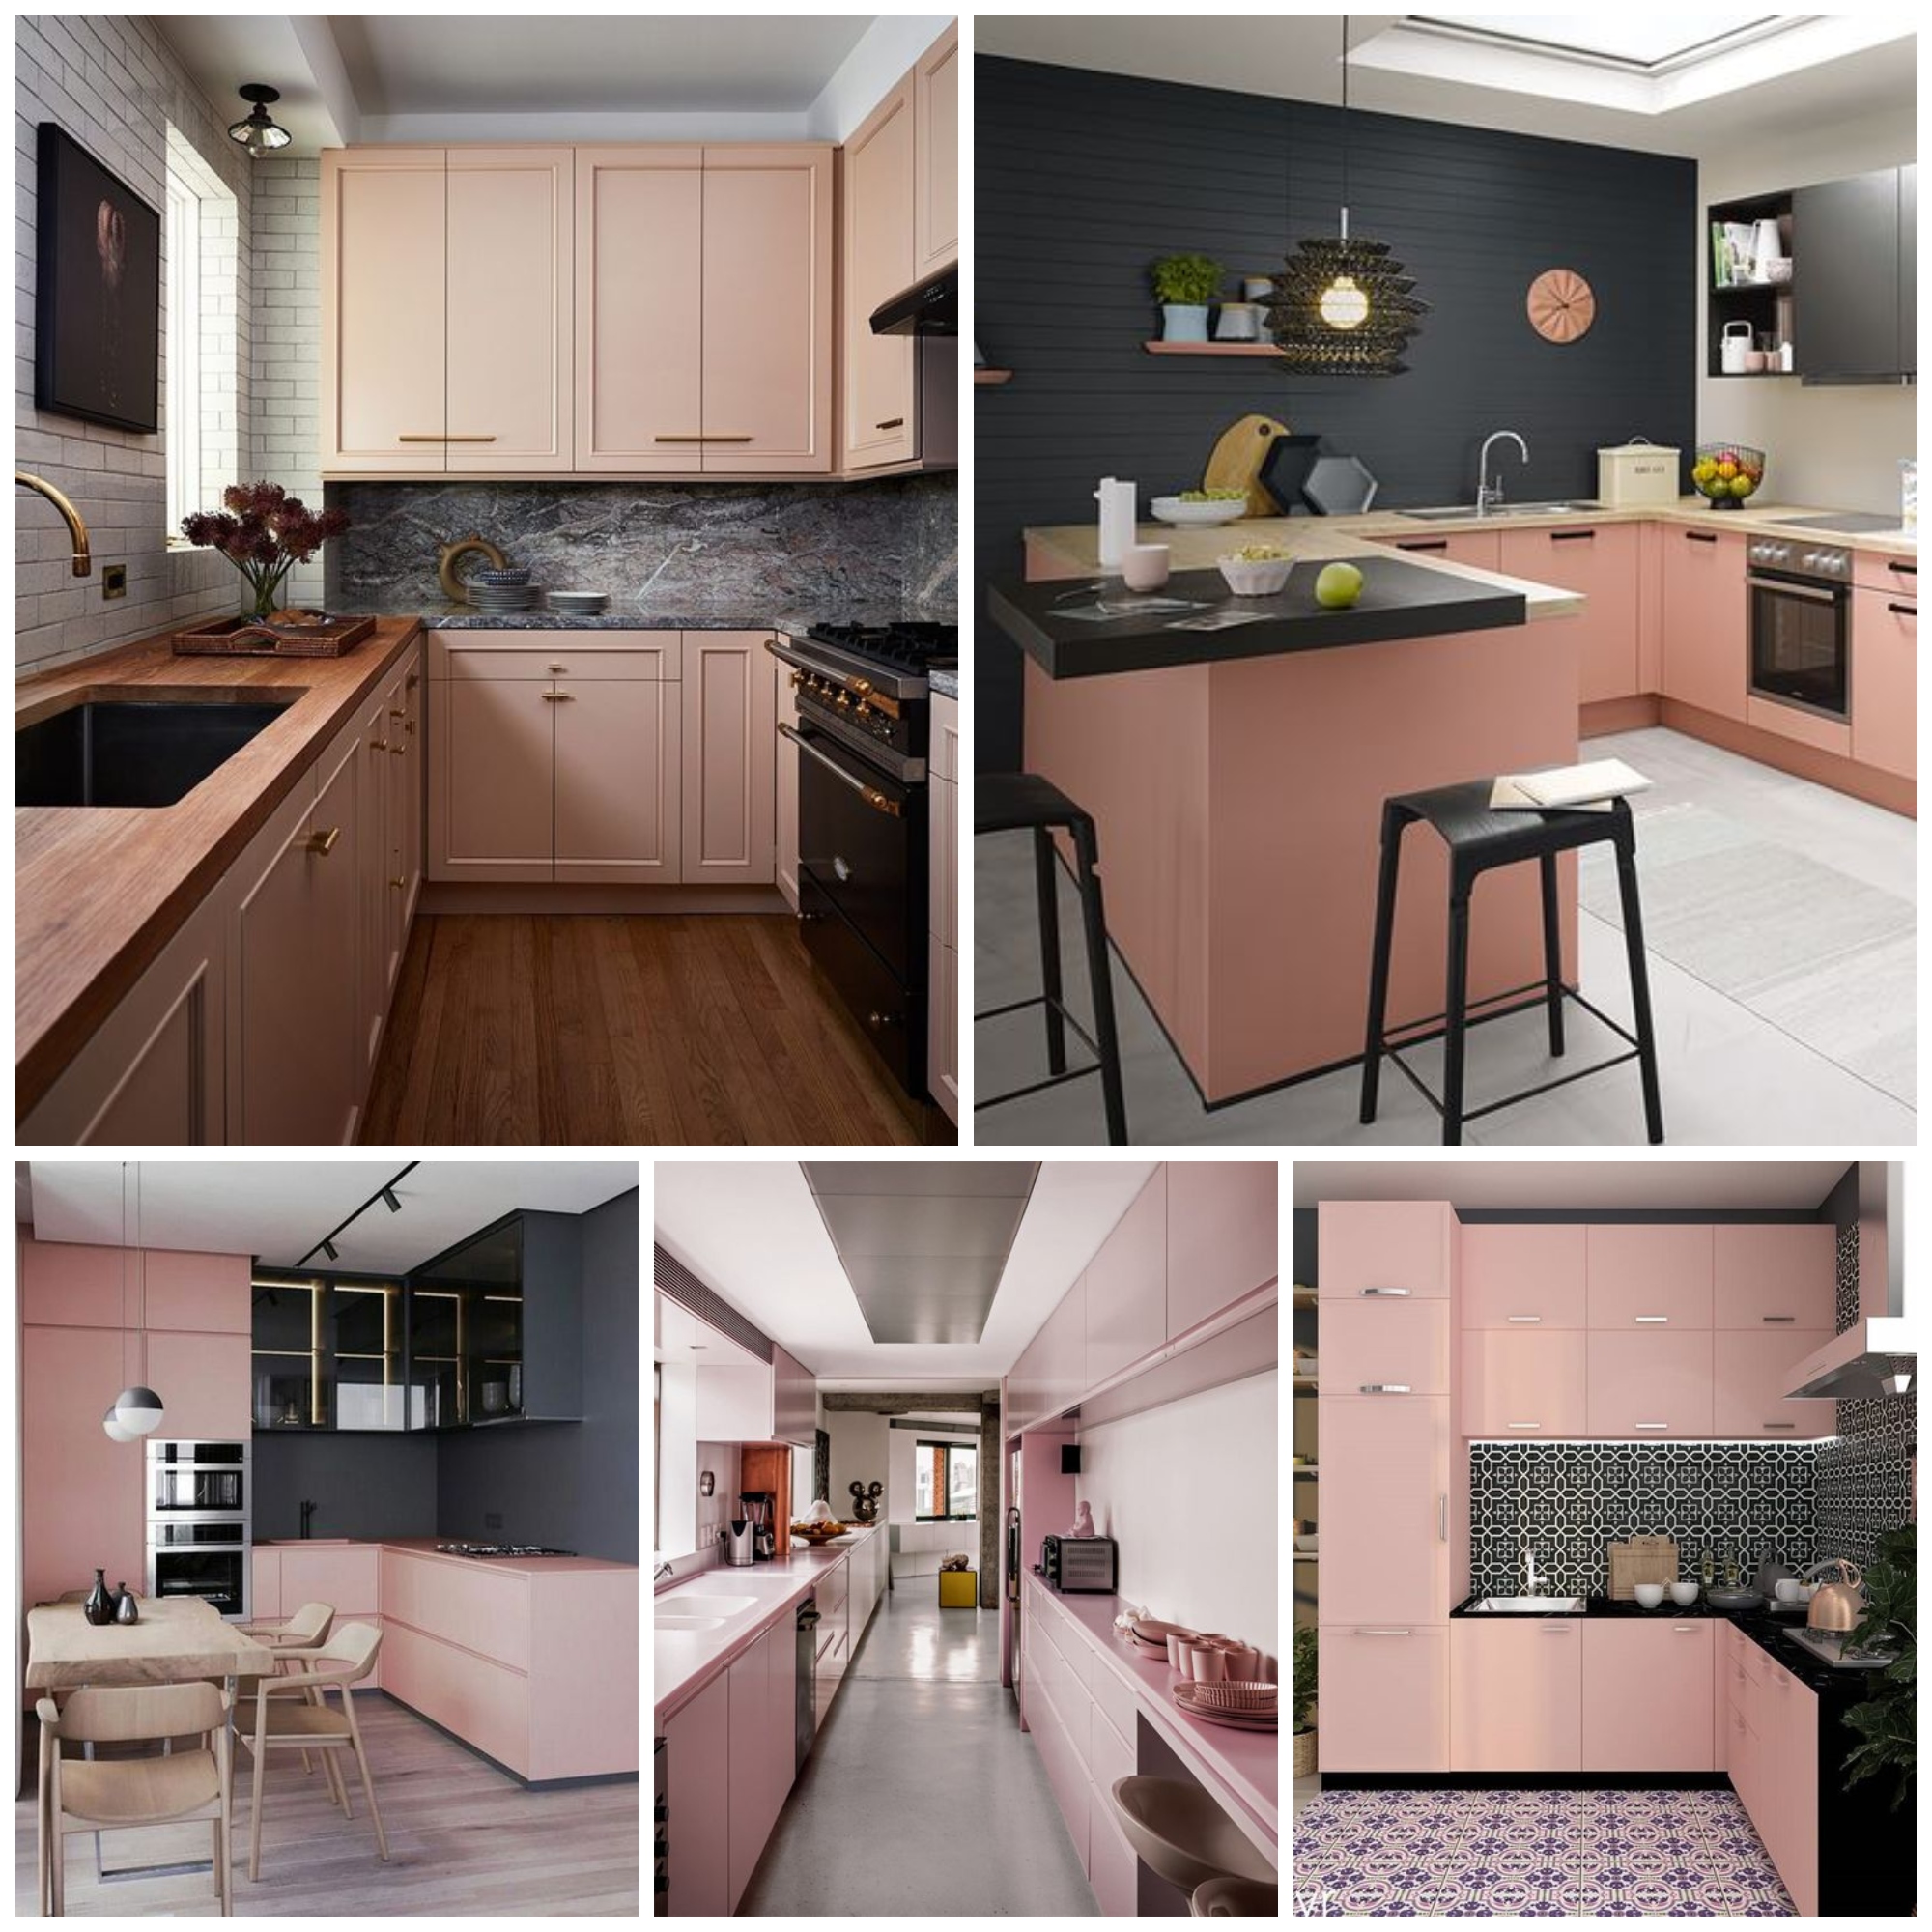 The rise of pink kitchens